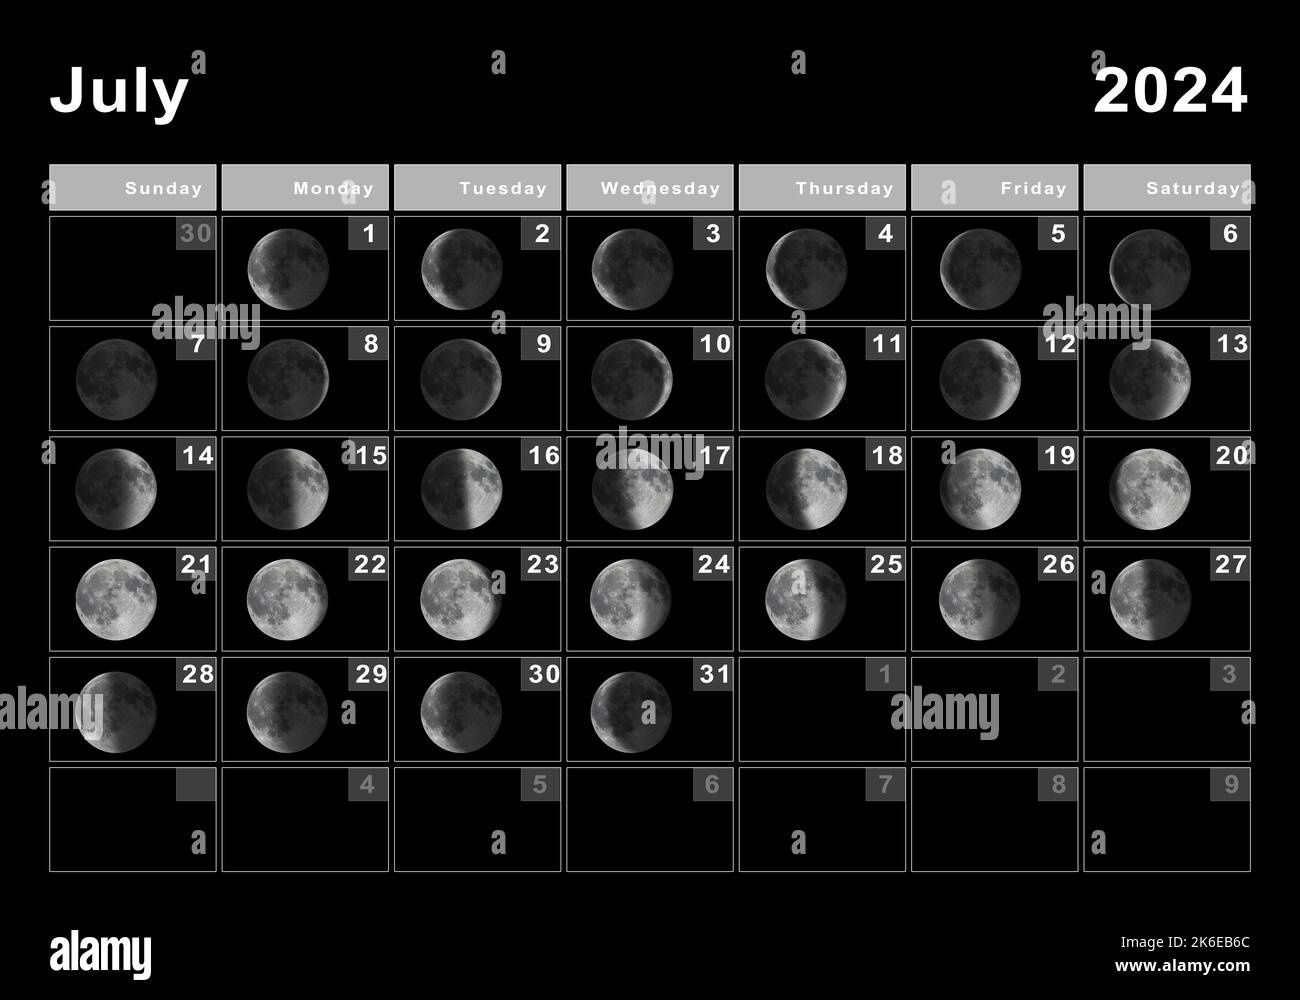 July 2024 Lunar Calendar, Moon Cycles, Moon Phases Stock Photo - Alamy pertaining to July 13 Lunar Calendar 2024